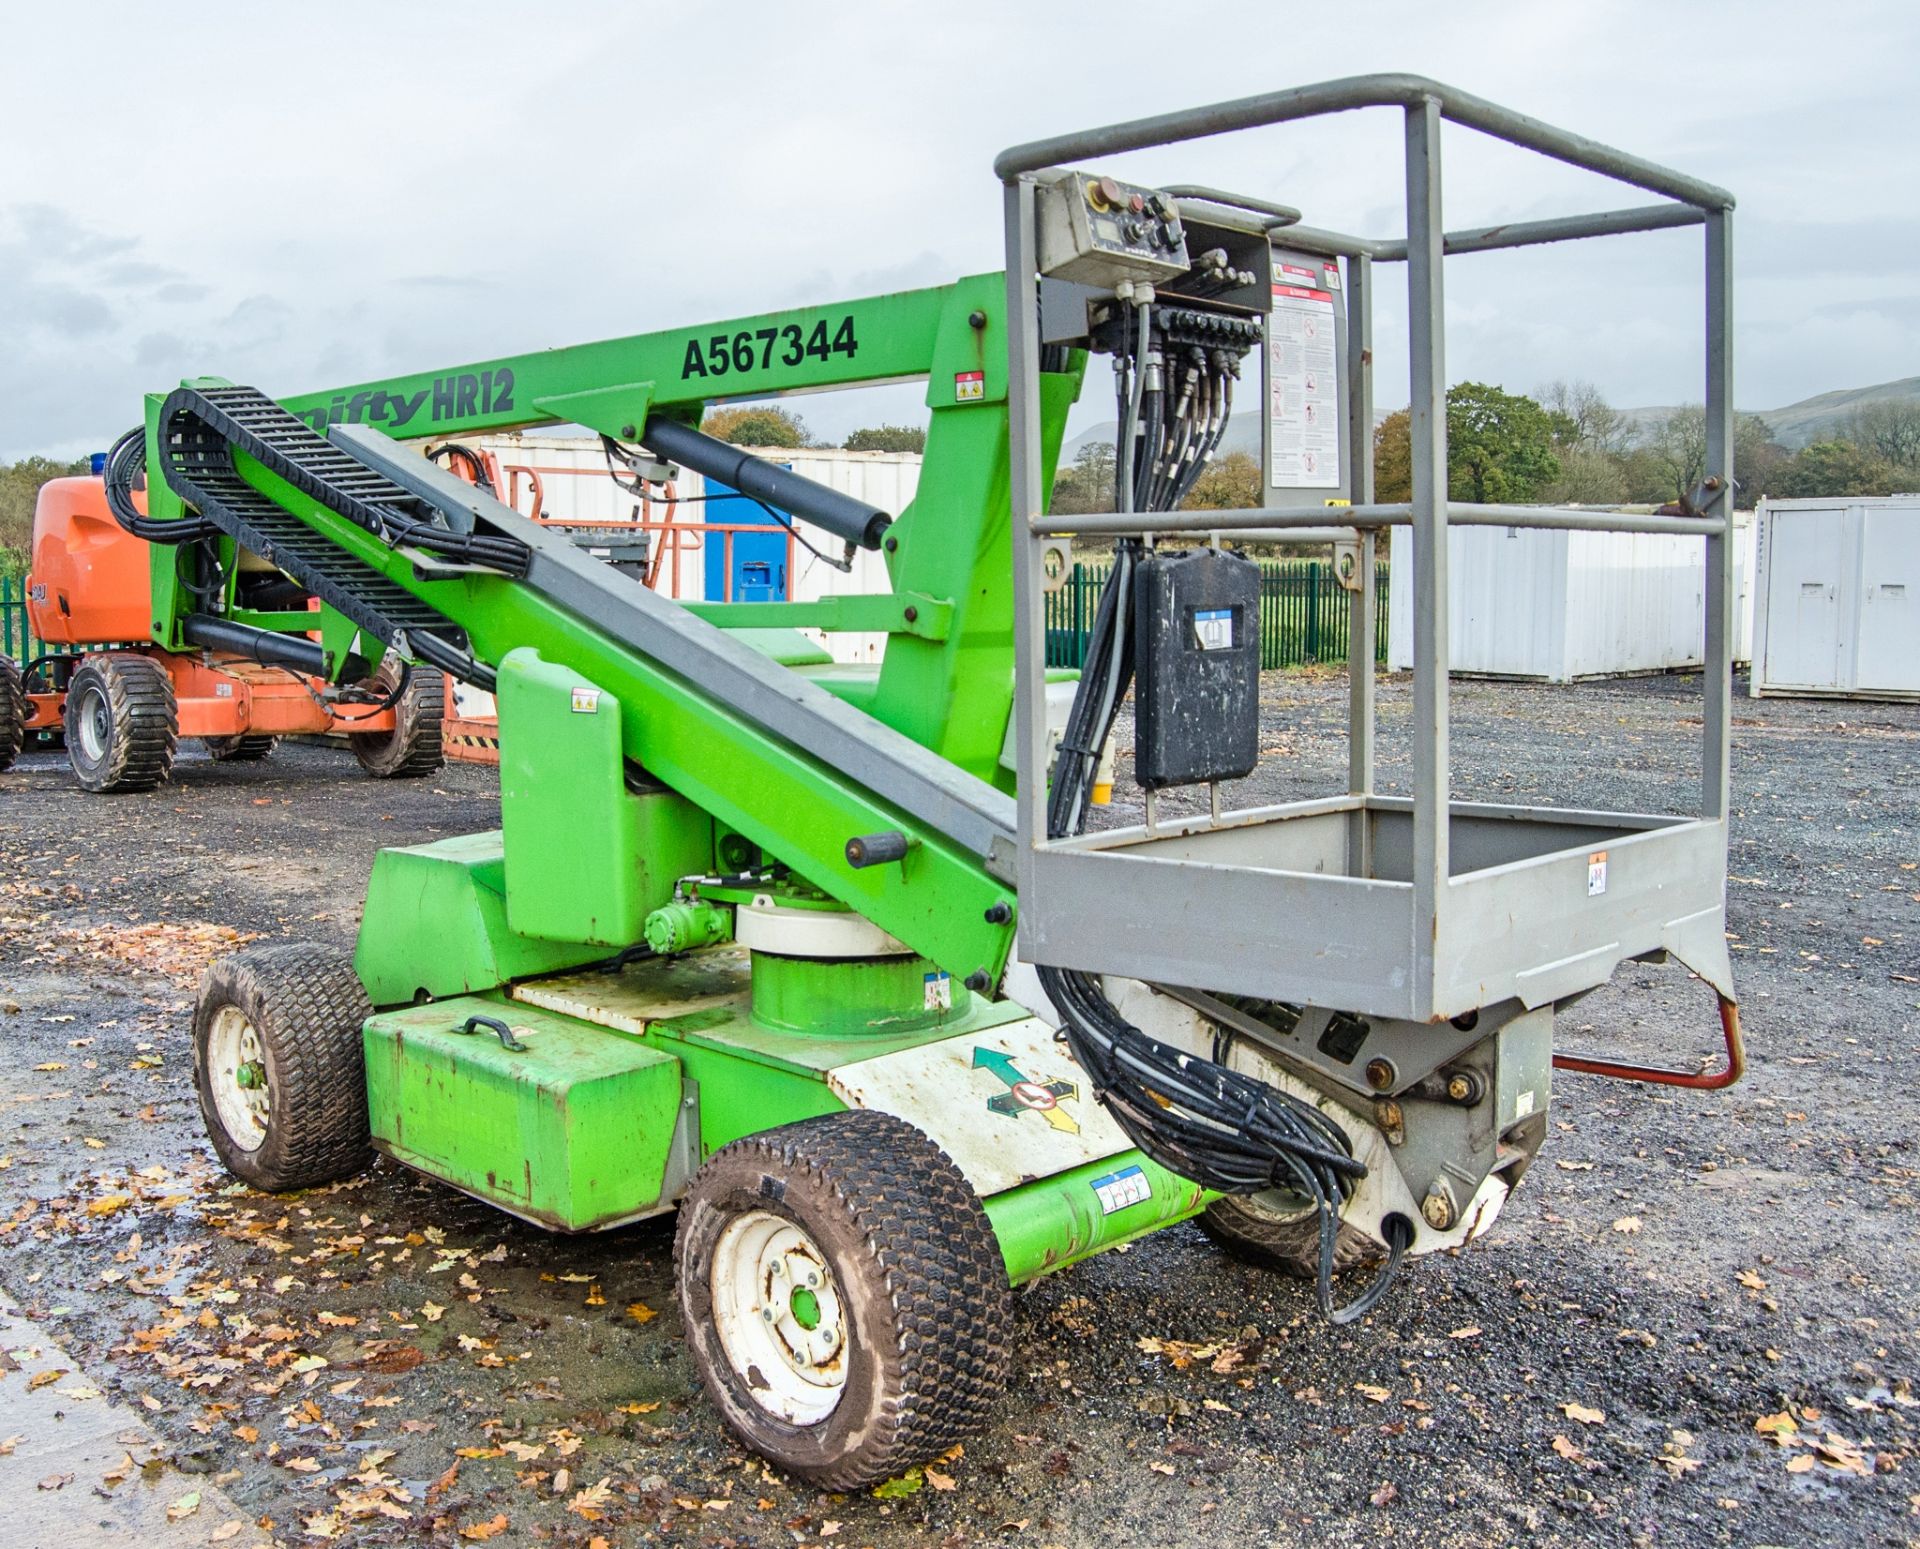 Nifty HR12 diesel/battery articulated boom lift access platform Year: 2011 S/N: 1221665 A567344 - Image 2 of 19